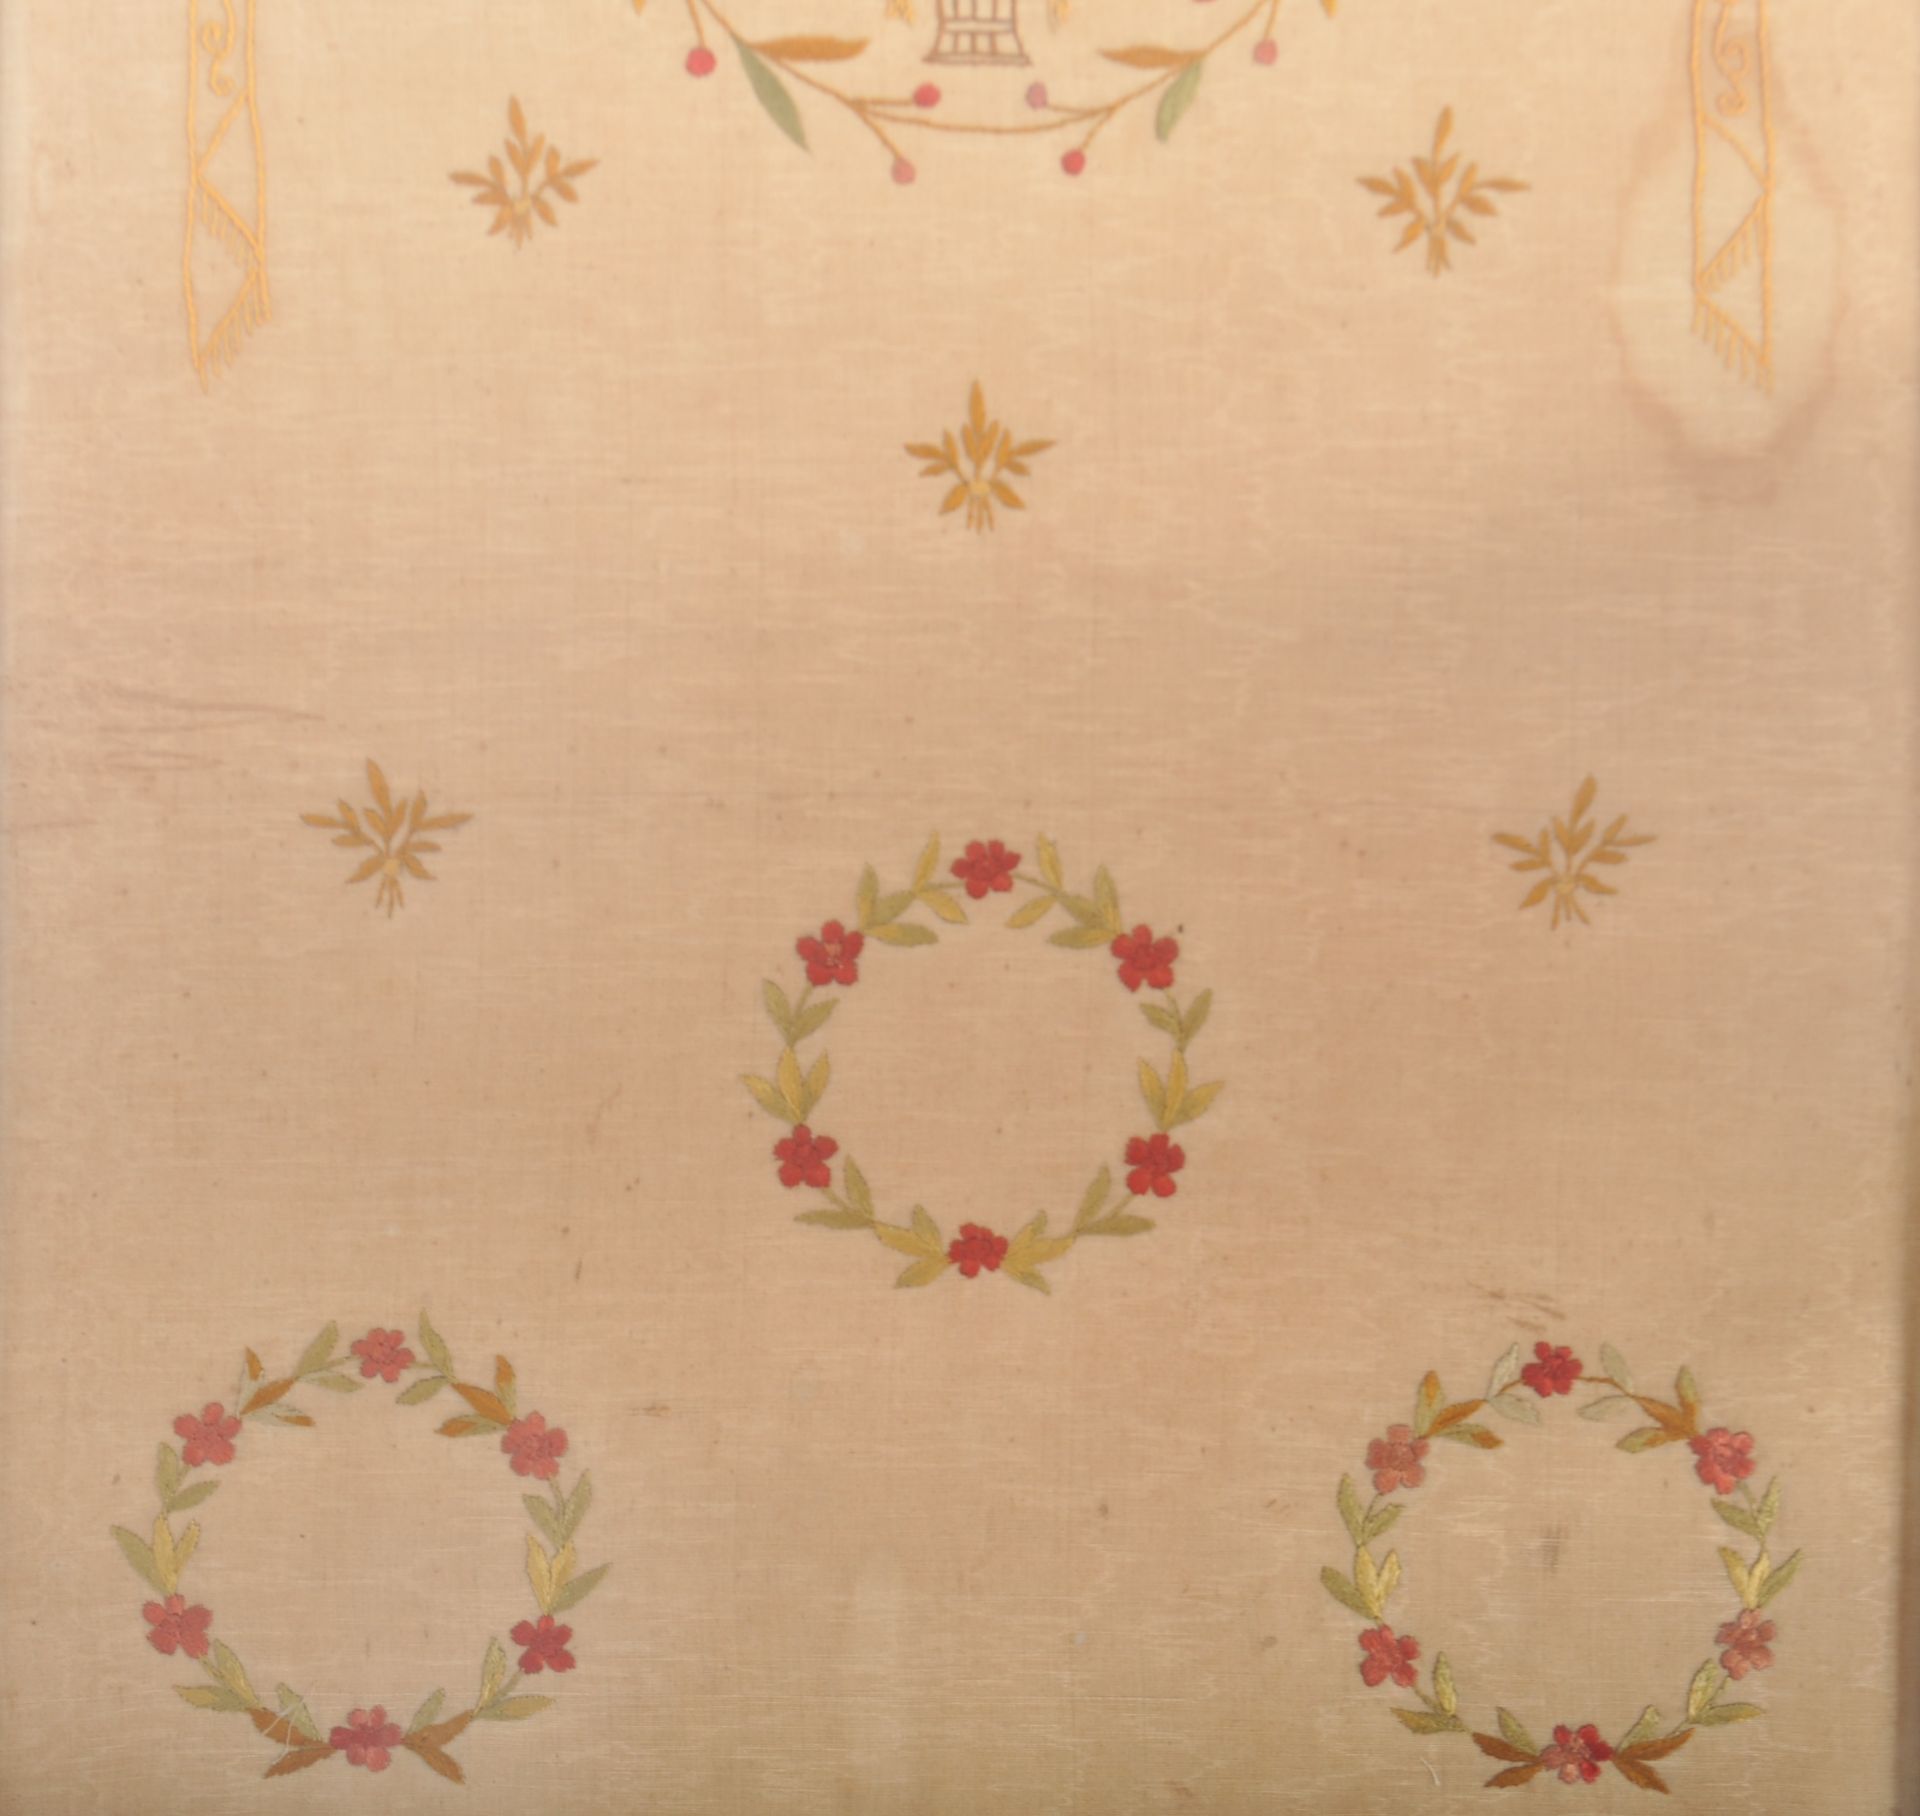 19TH CENTURY VICTORIAN NEEDLEWORK FLORAL PANEL - Image 4 of 4